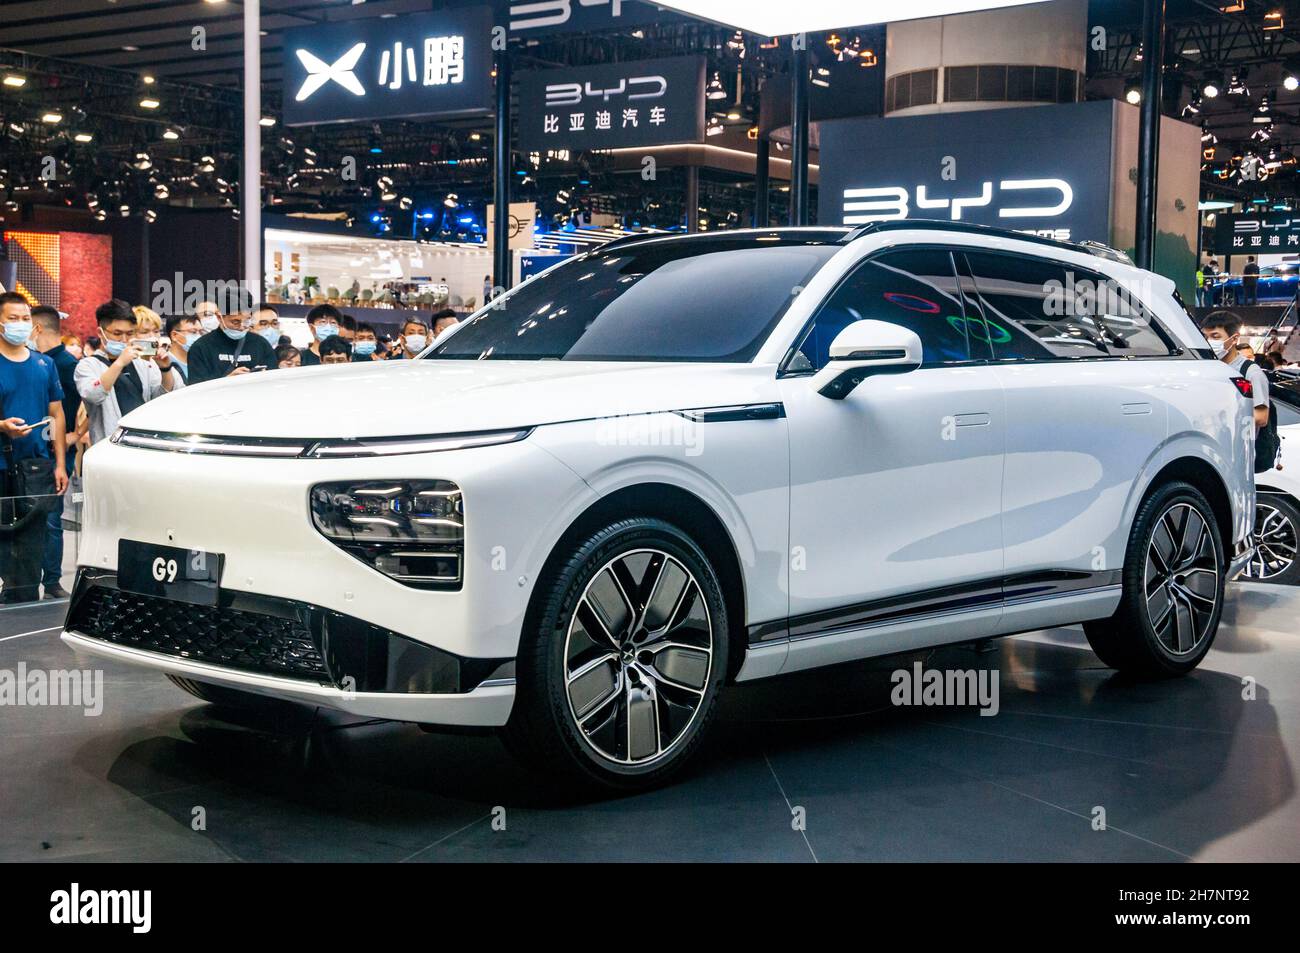 XPeng G9 electric car seen on display at the 2021 Guangzhou Auto Show